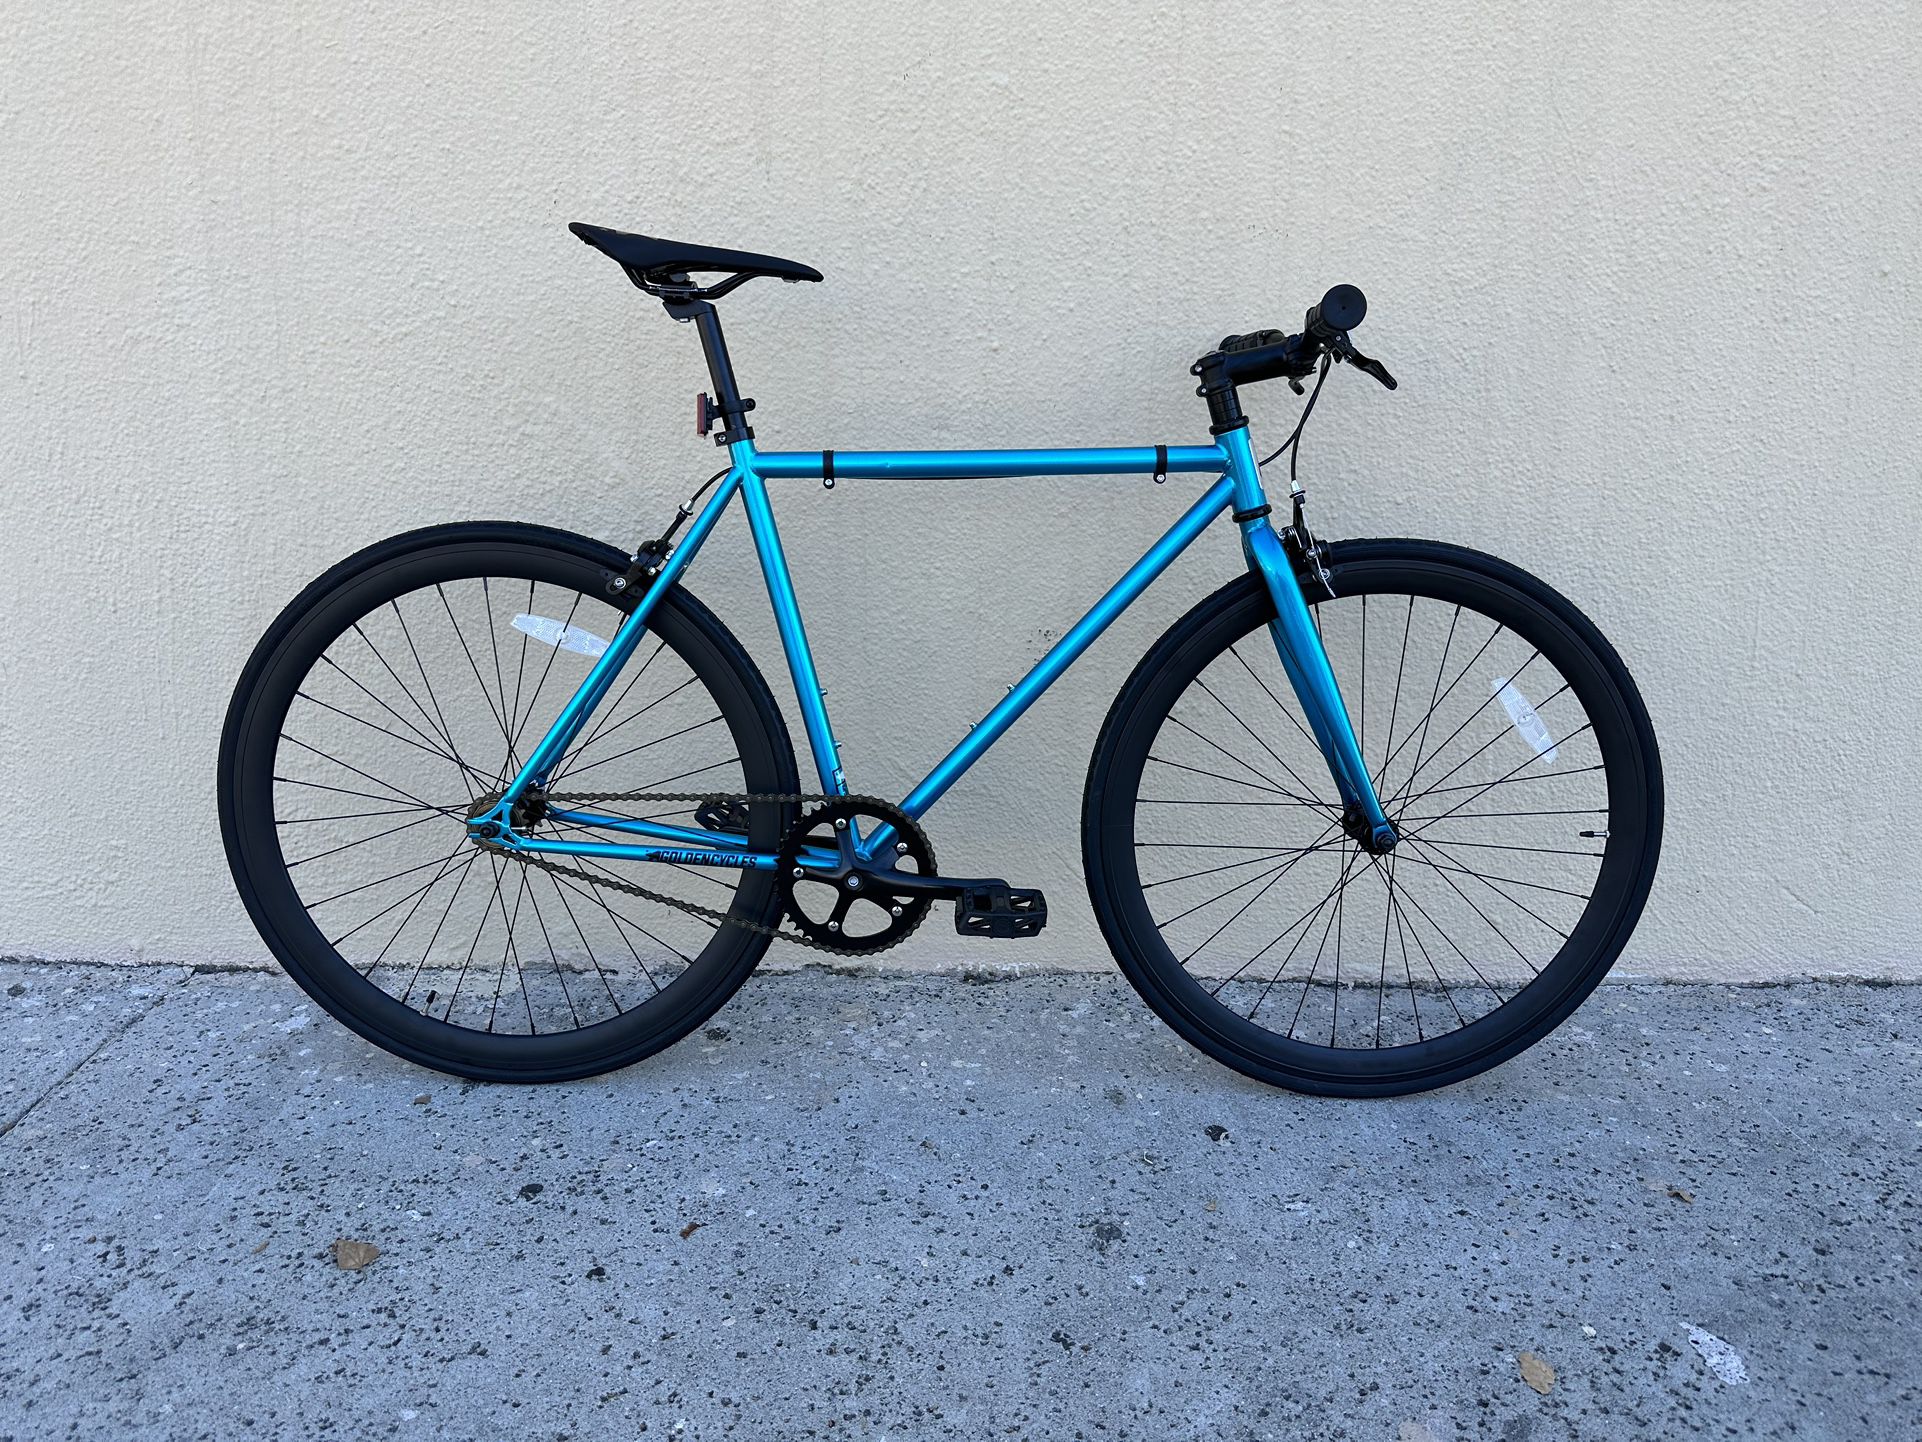 Bran New Golden Cycle Fixi Bike For Sale